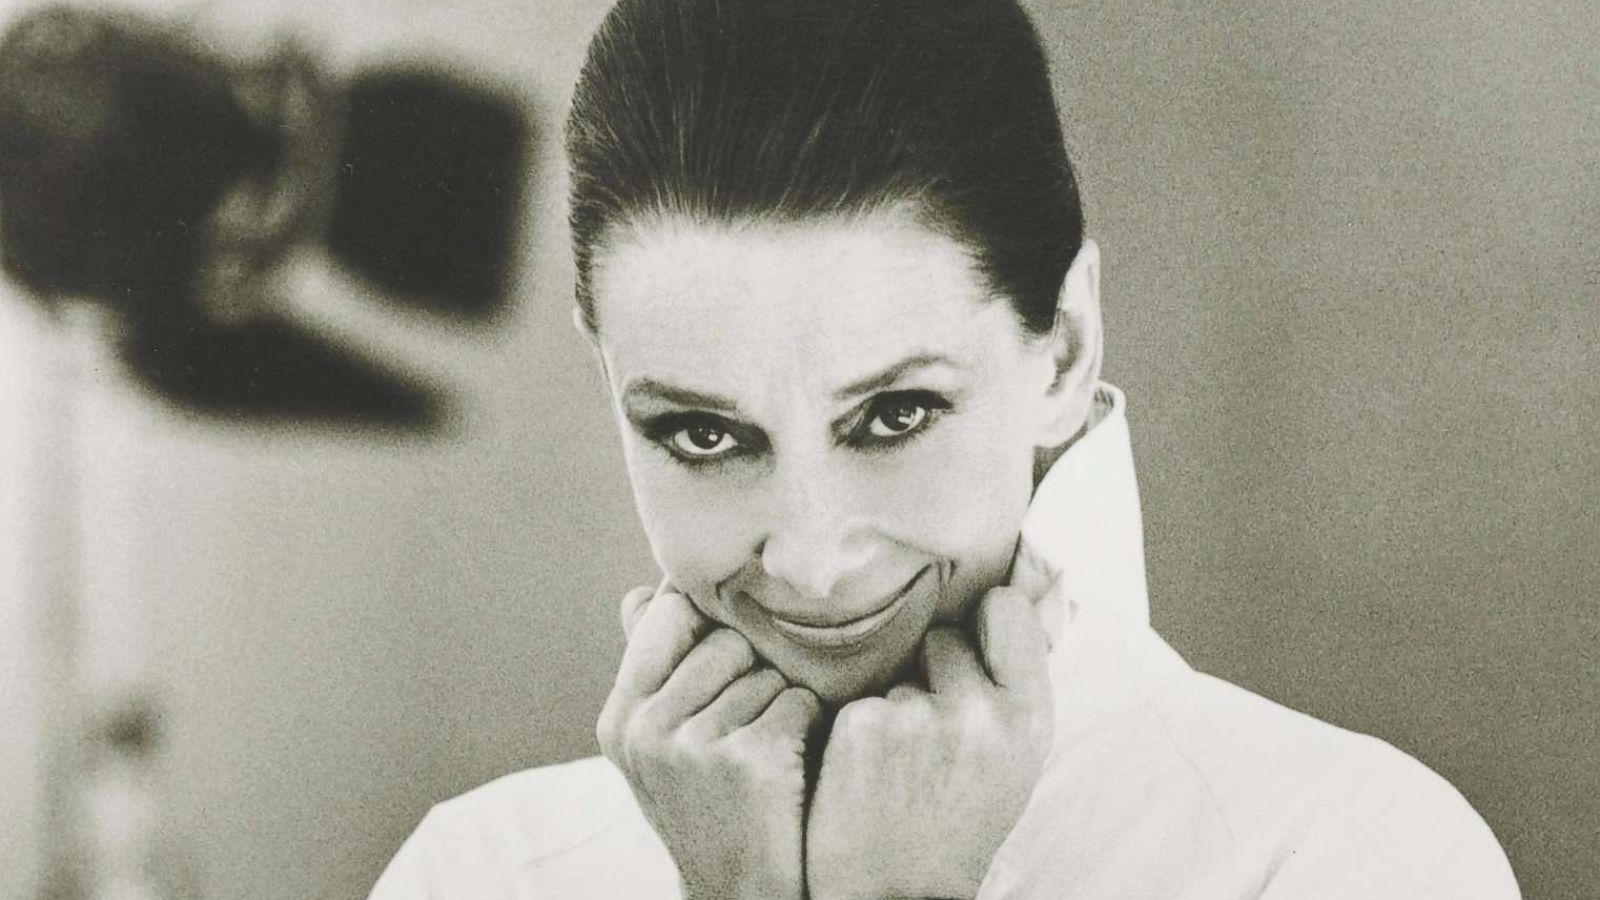 PHOTO: An image of Audrey Hepburn from one of her last significant shoots taken by Steven Meisel for Vanity Fair, May 1991, is up for auction at Christie's.